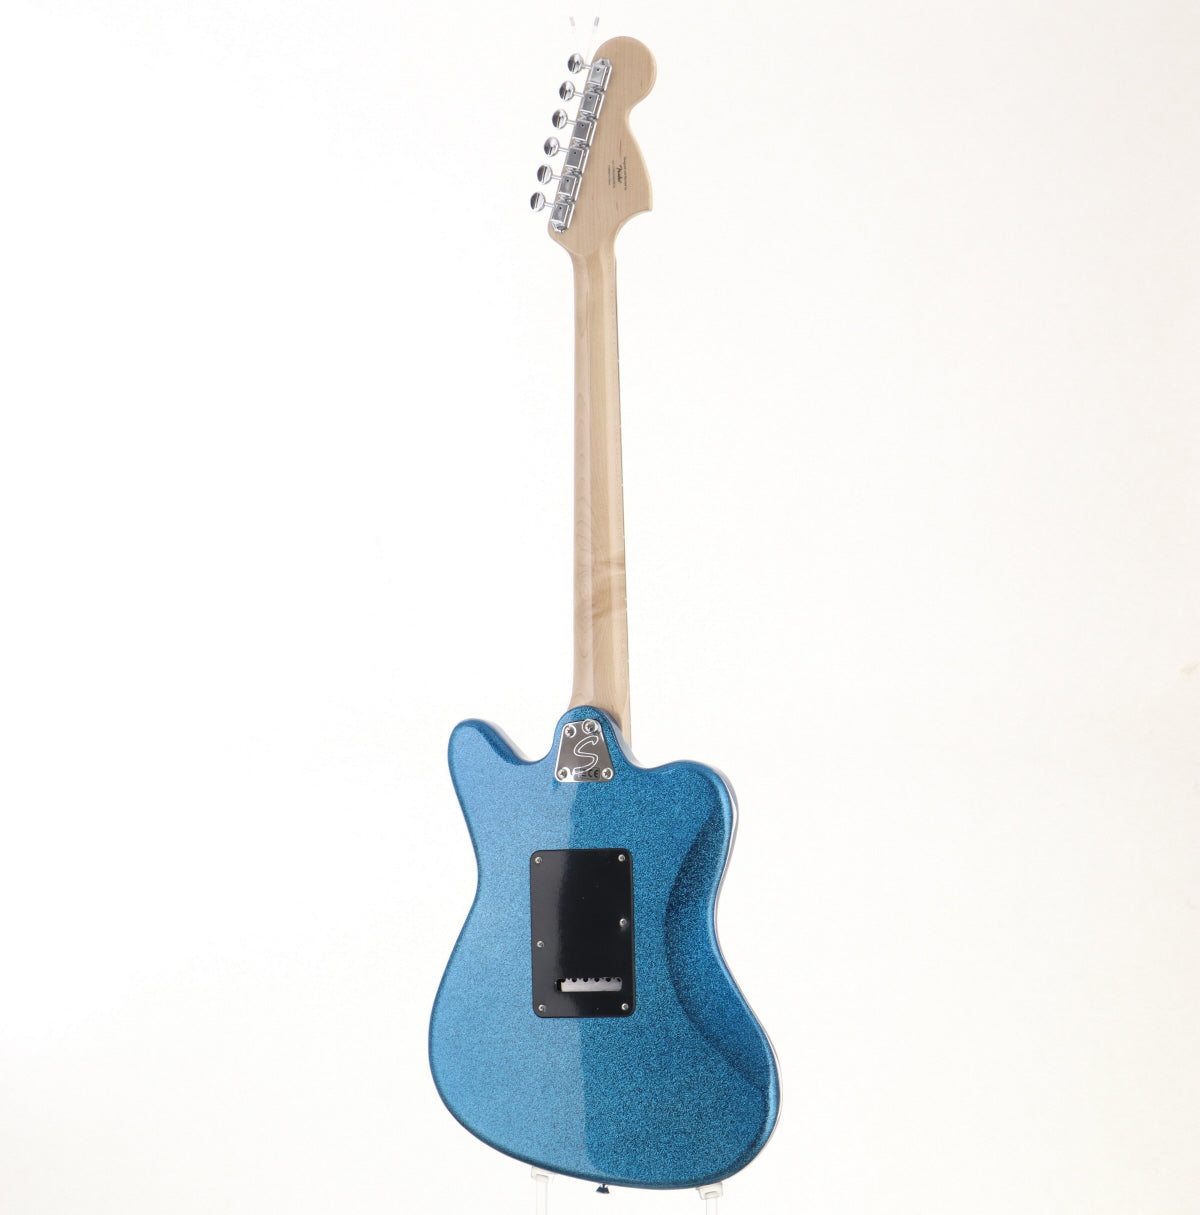 [SN CYK121000972] USED SQUIER / Paranormal Super-Sonic Blue Sparkle [03]